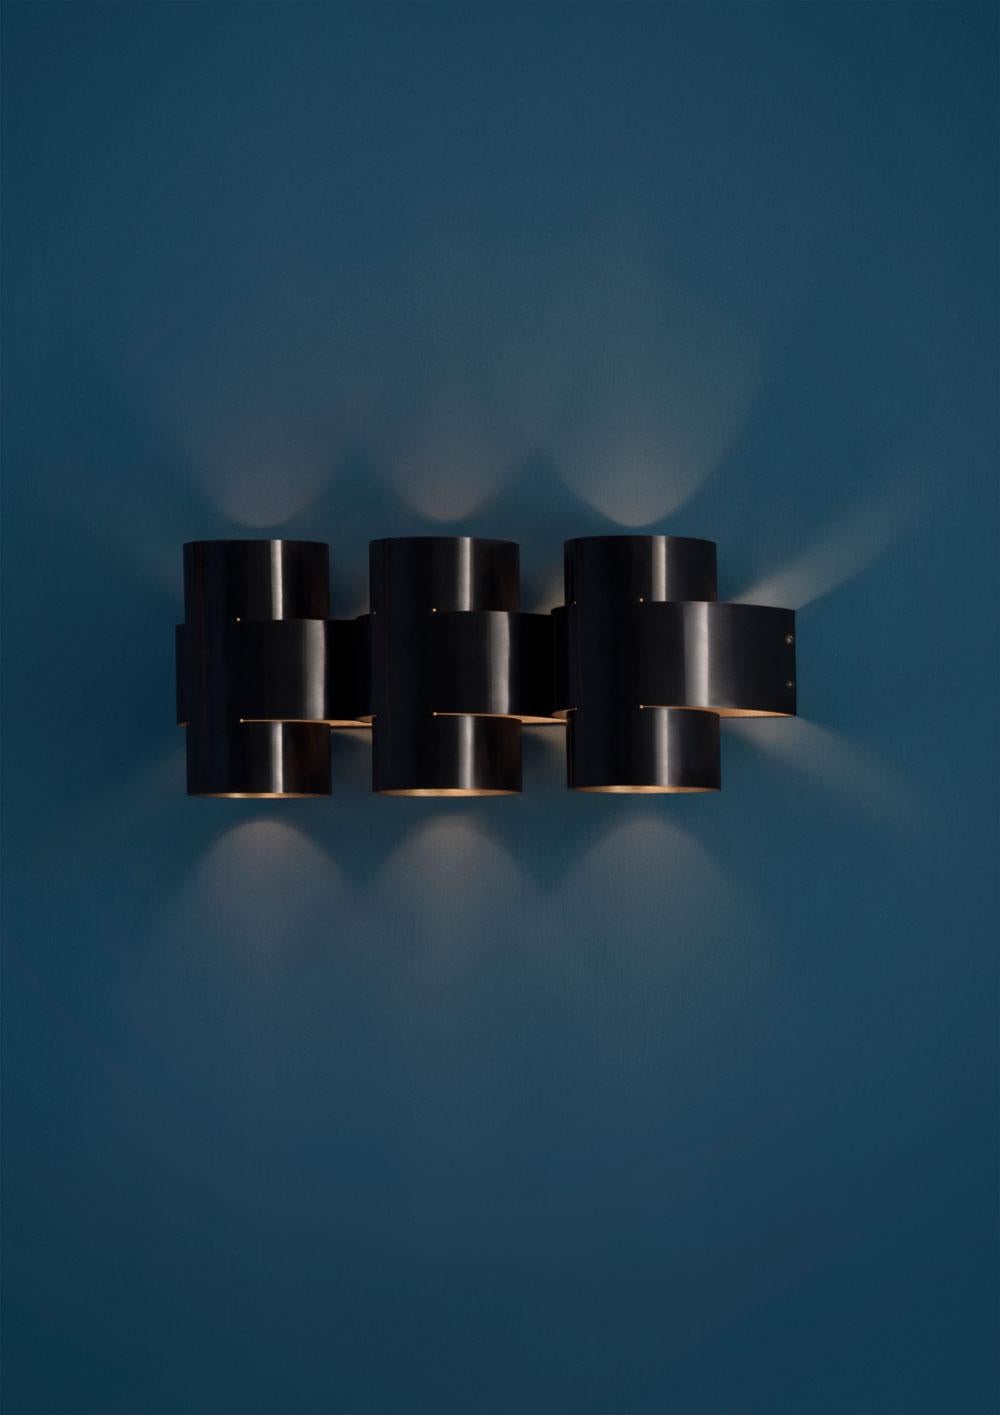 PLUS Series is a new range of appliqués by Paul Matter that feature a simple shape in singular and repetitive arrangements. A 3-Dimensional plus is formed out of a single tube of brass that is cut, bent and finished. The light source nestled within